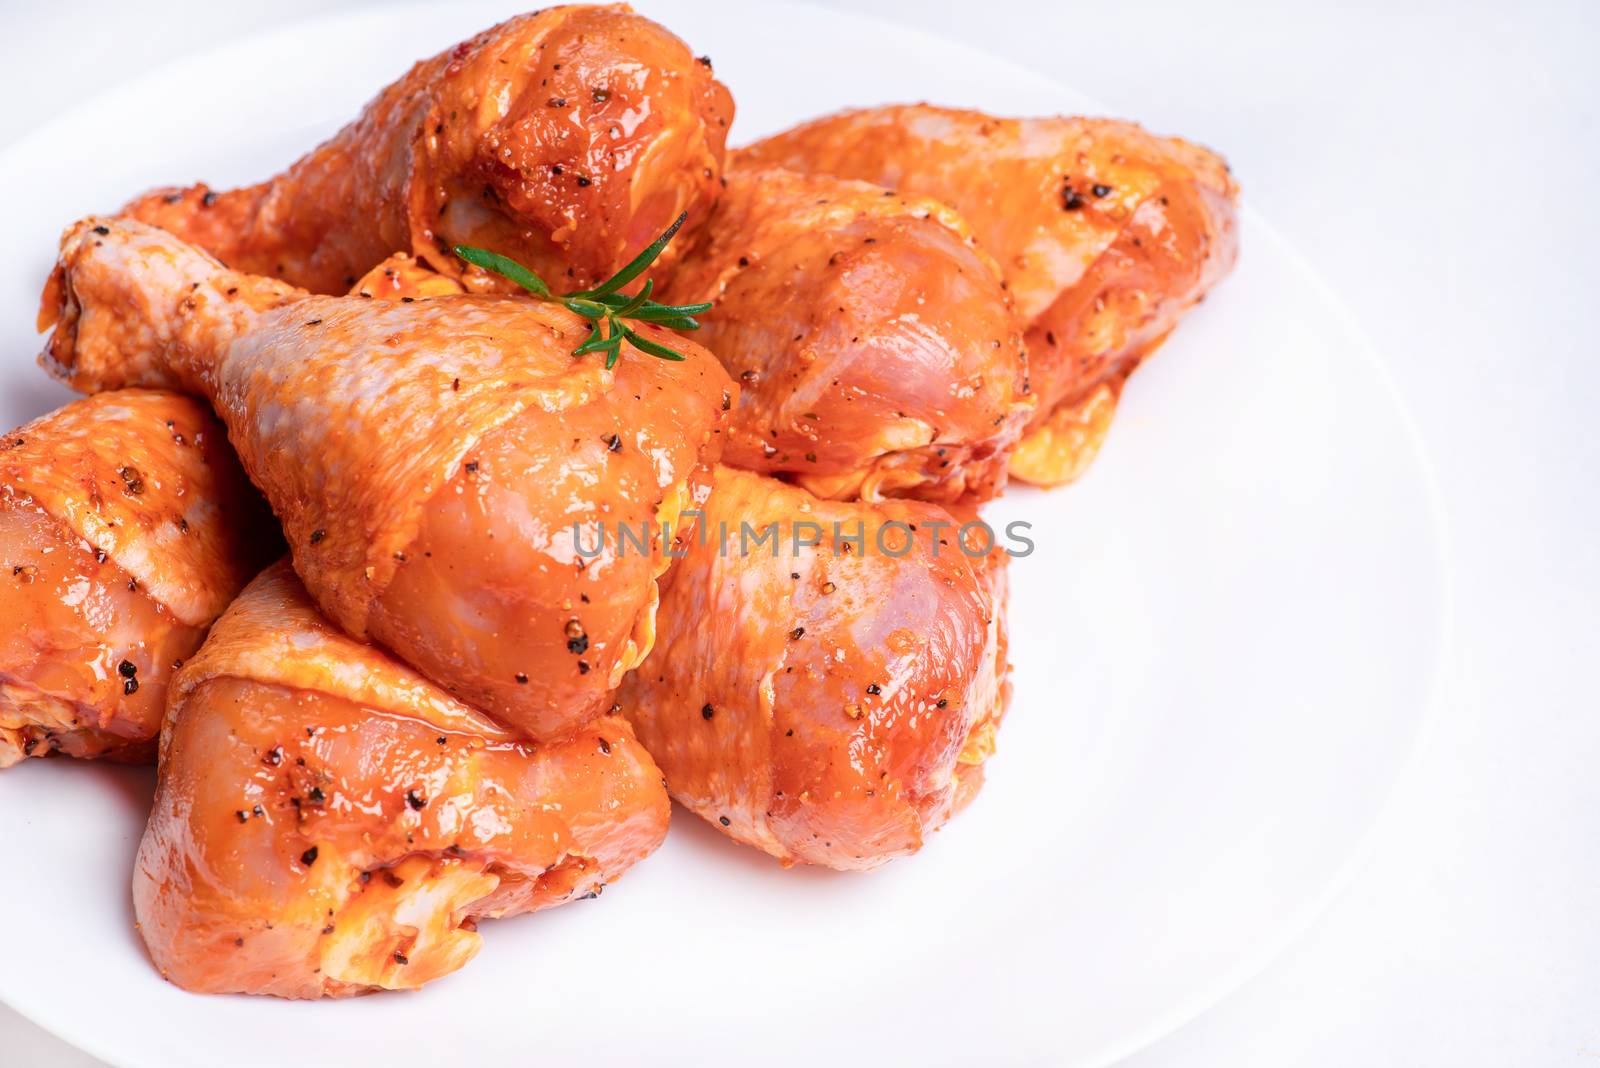 Chicken legs in a red marinade on a white plate. Top view. Chicken meat close-up.Dietary meat. Cooking.Raw marinated chicken legs for grill and bbq.Isolate. by nkooume